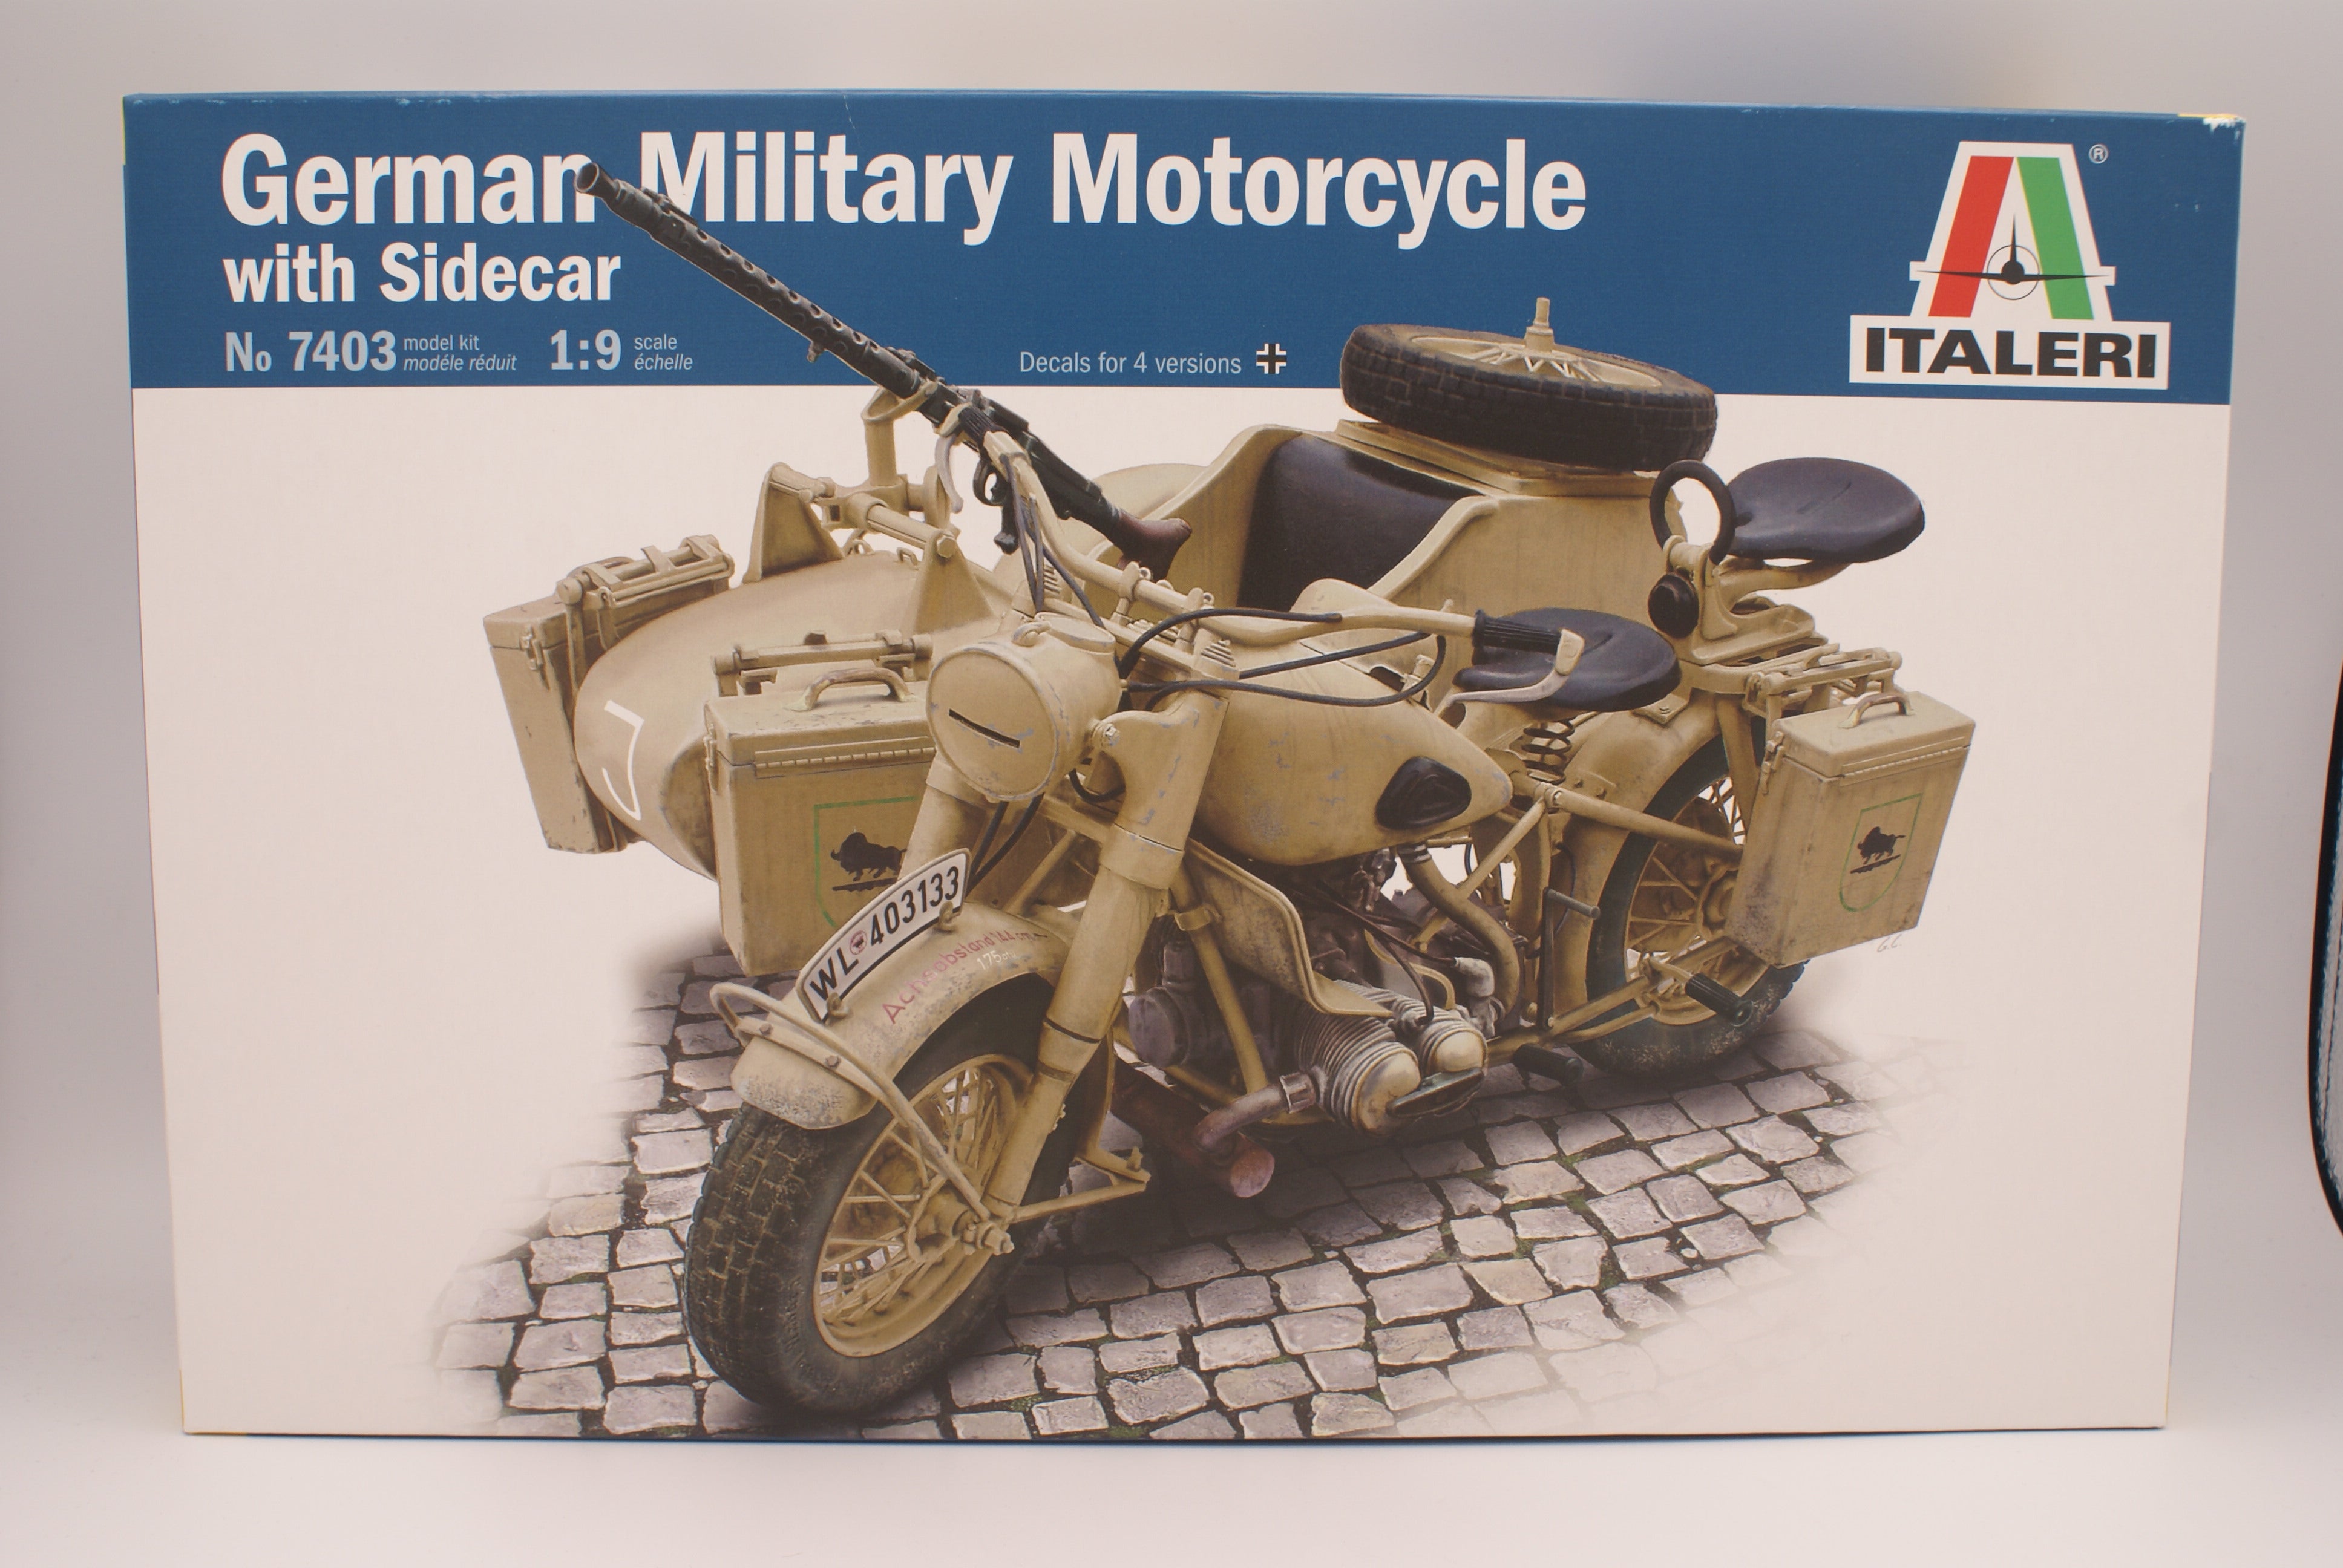 German Military Motorcycle with Sidecar